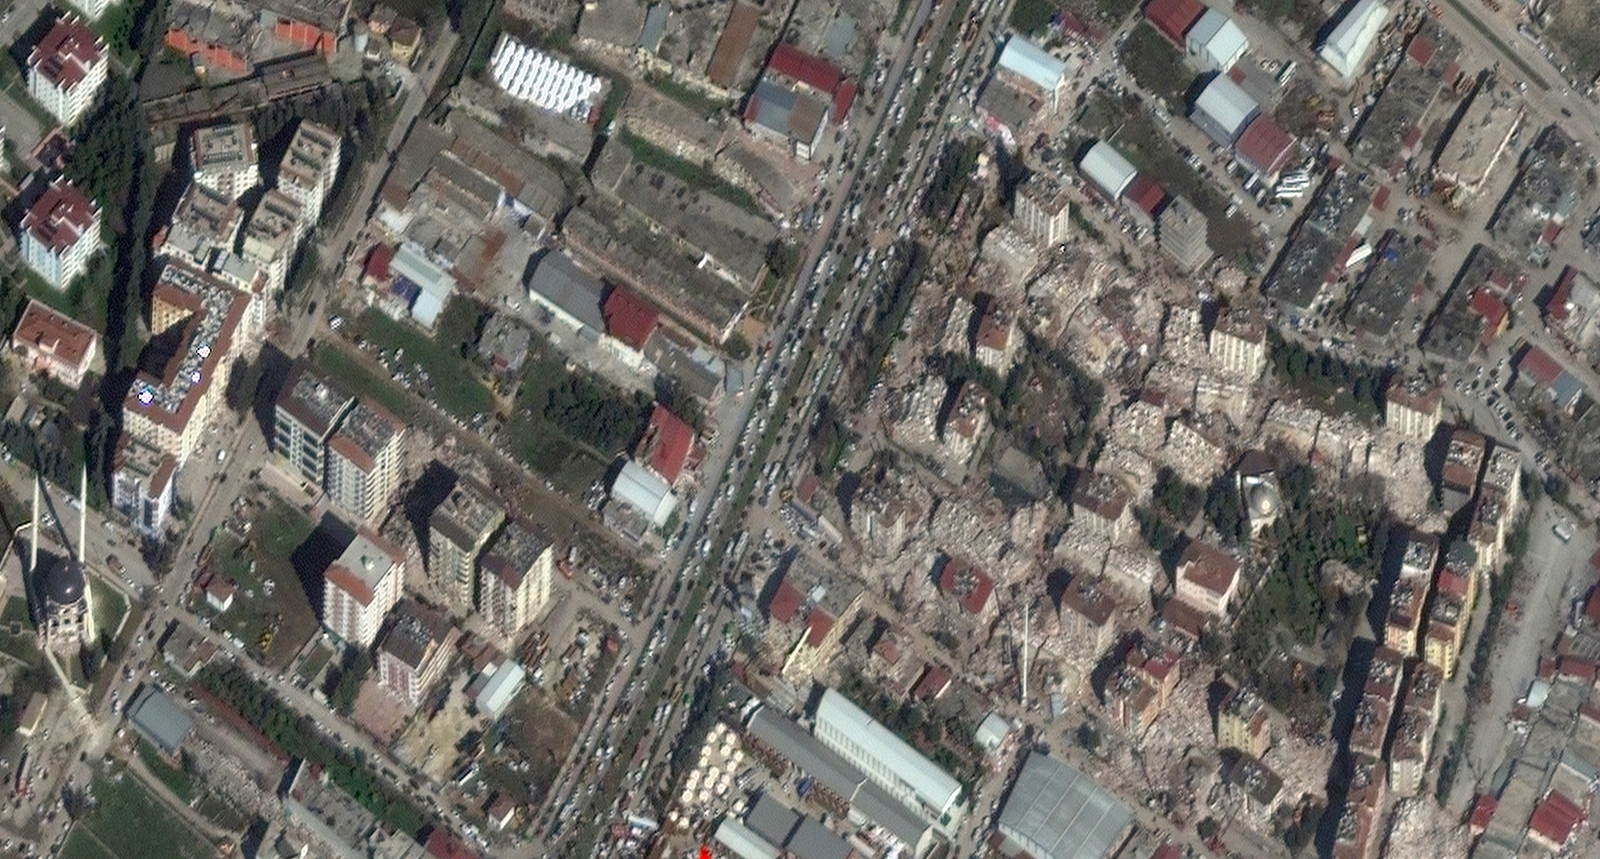 A satellite image shows collapsed buildings in Antakya, Turkey, on February 9.